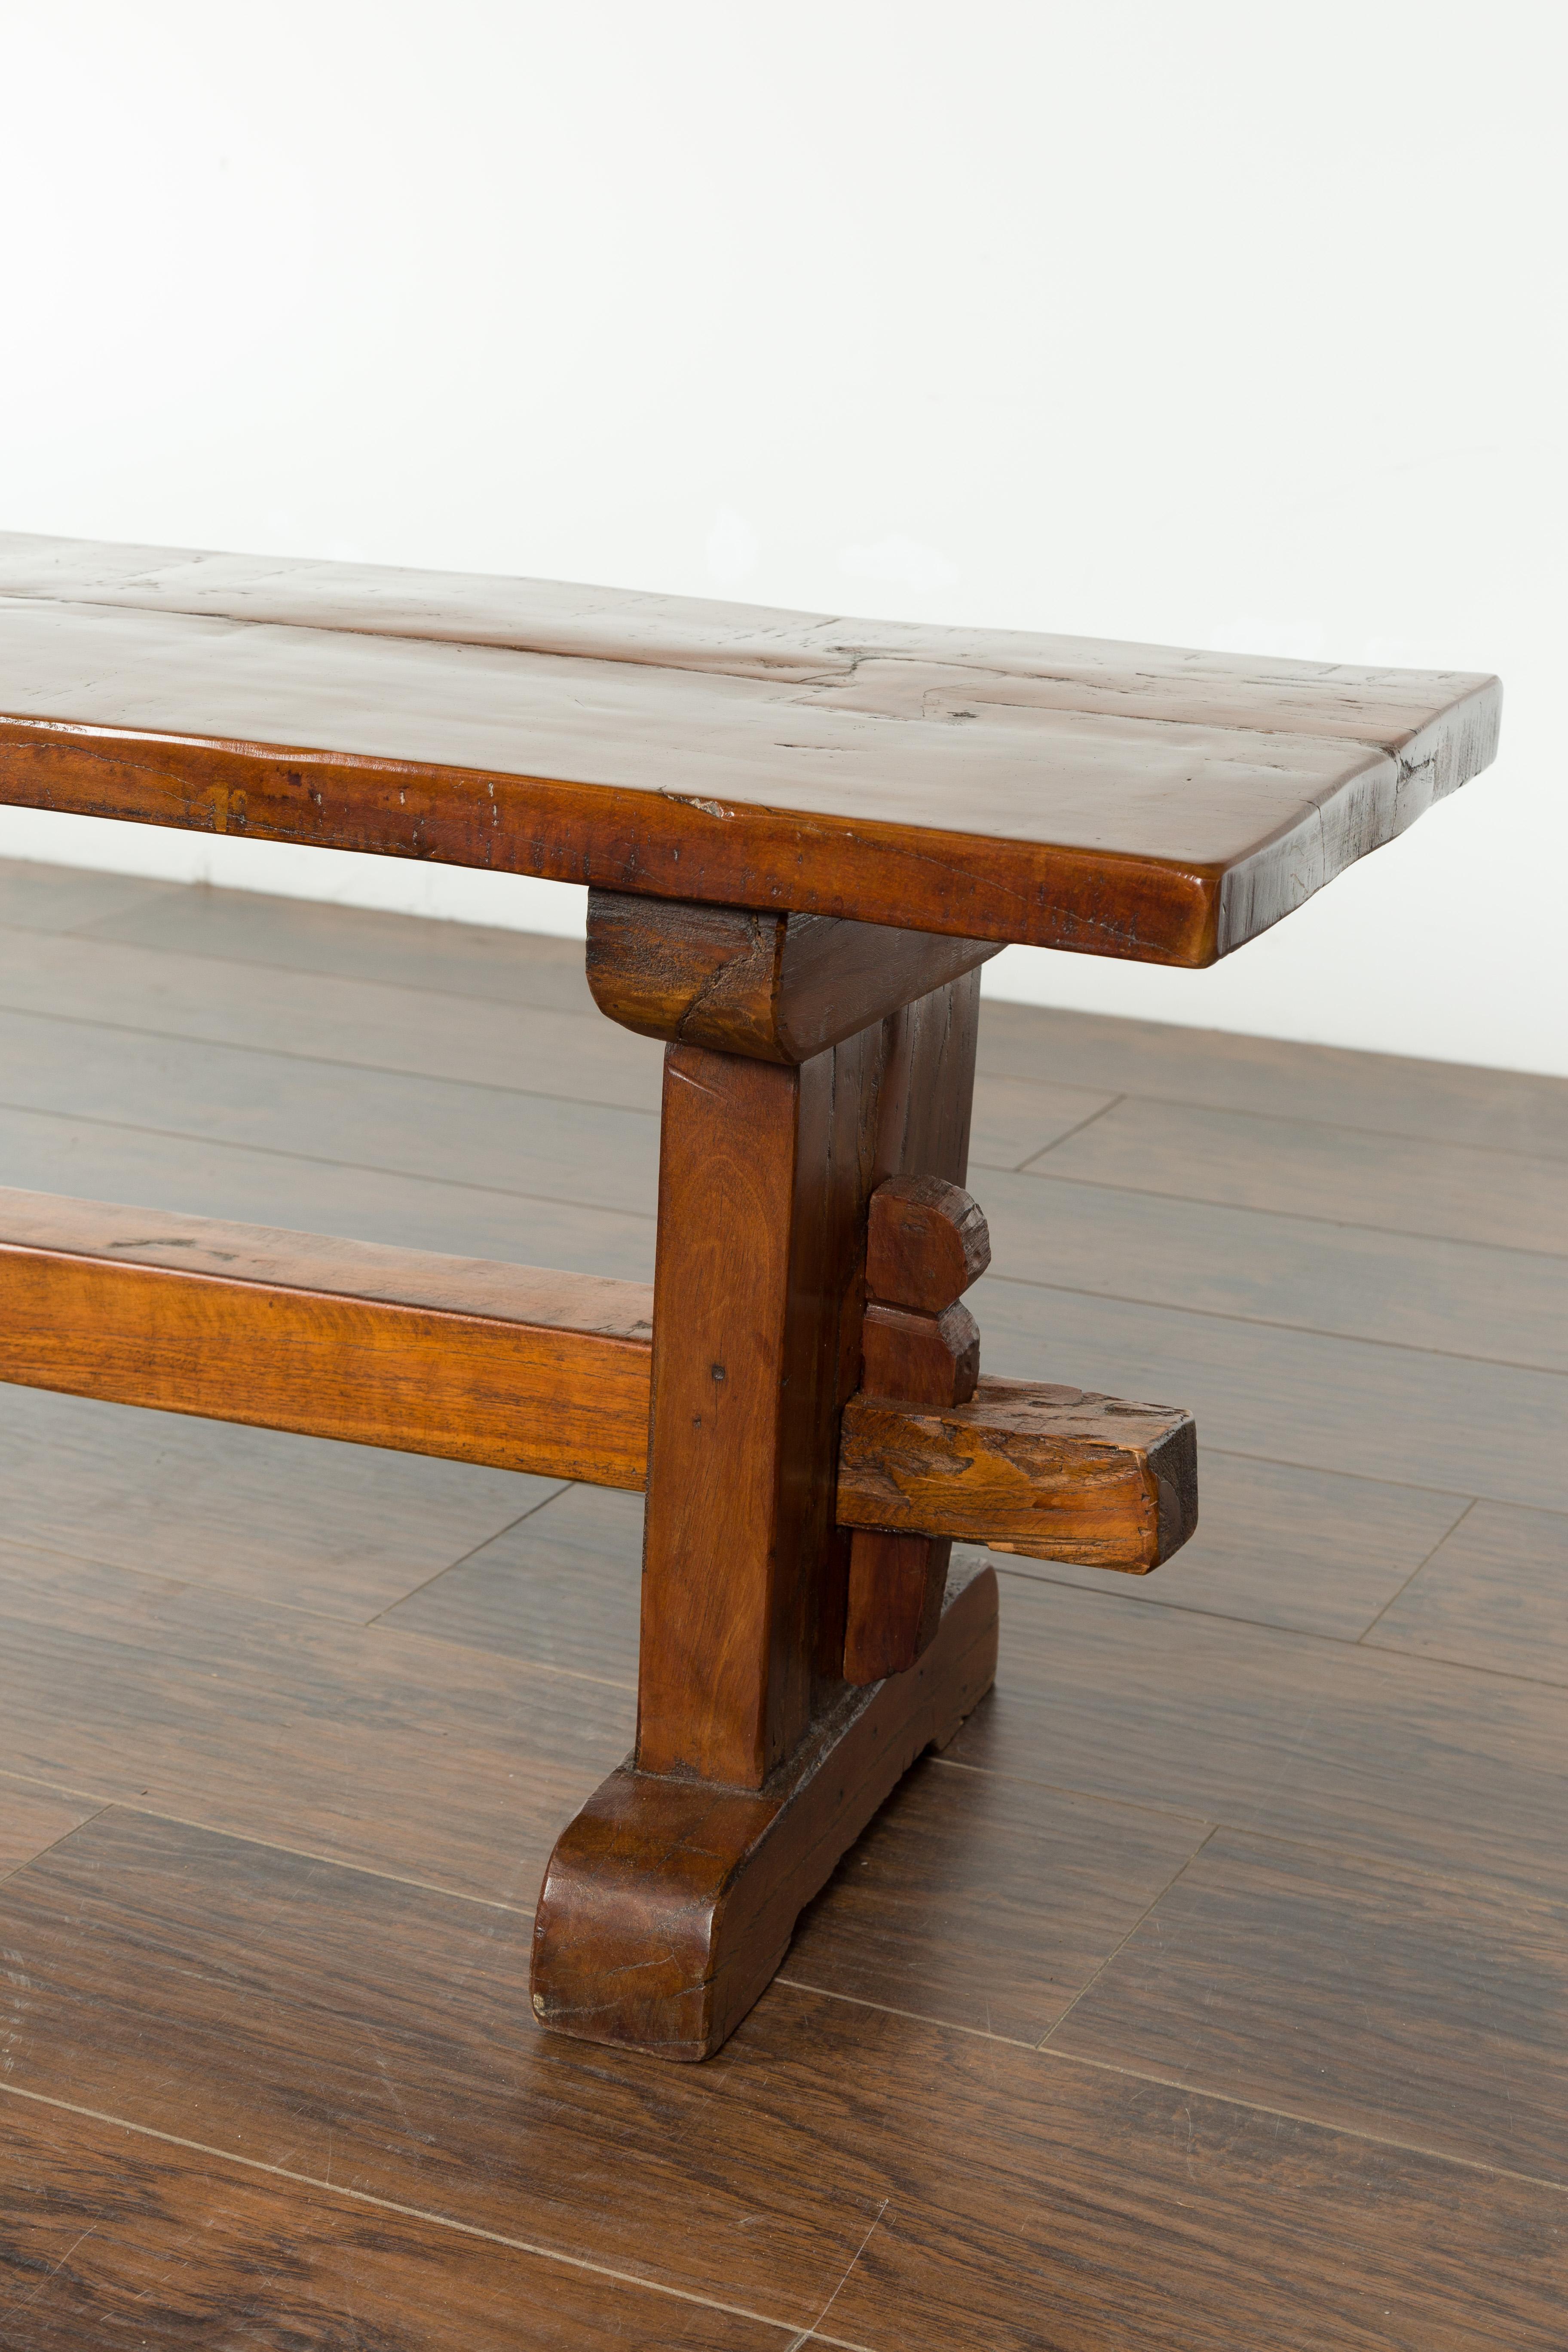 Rustic Italian Walnut Bench with Trestle Base from the Early 19th Century 3